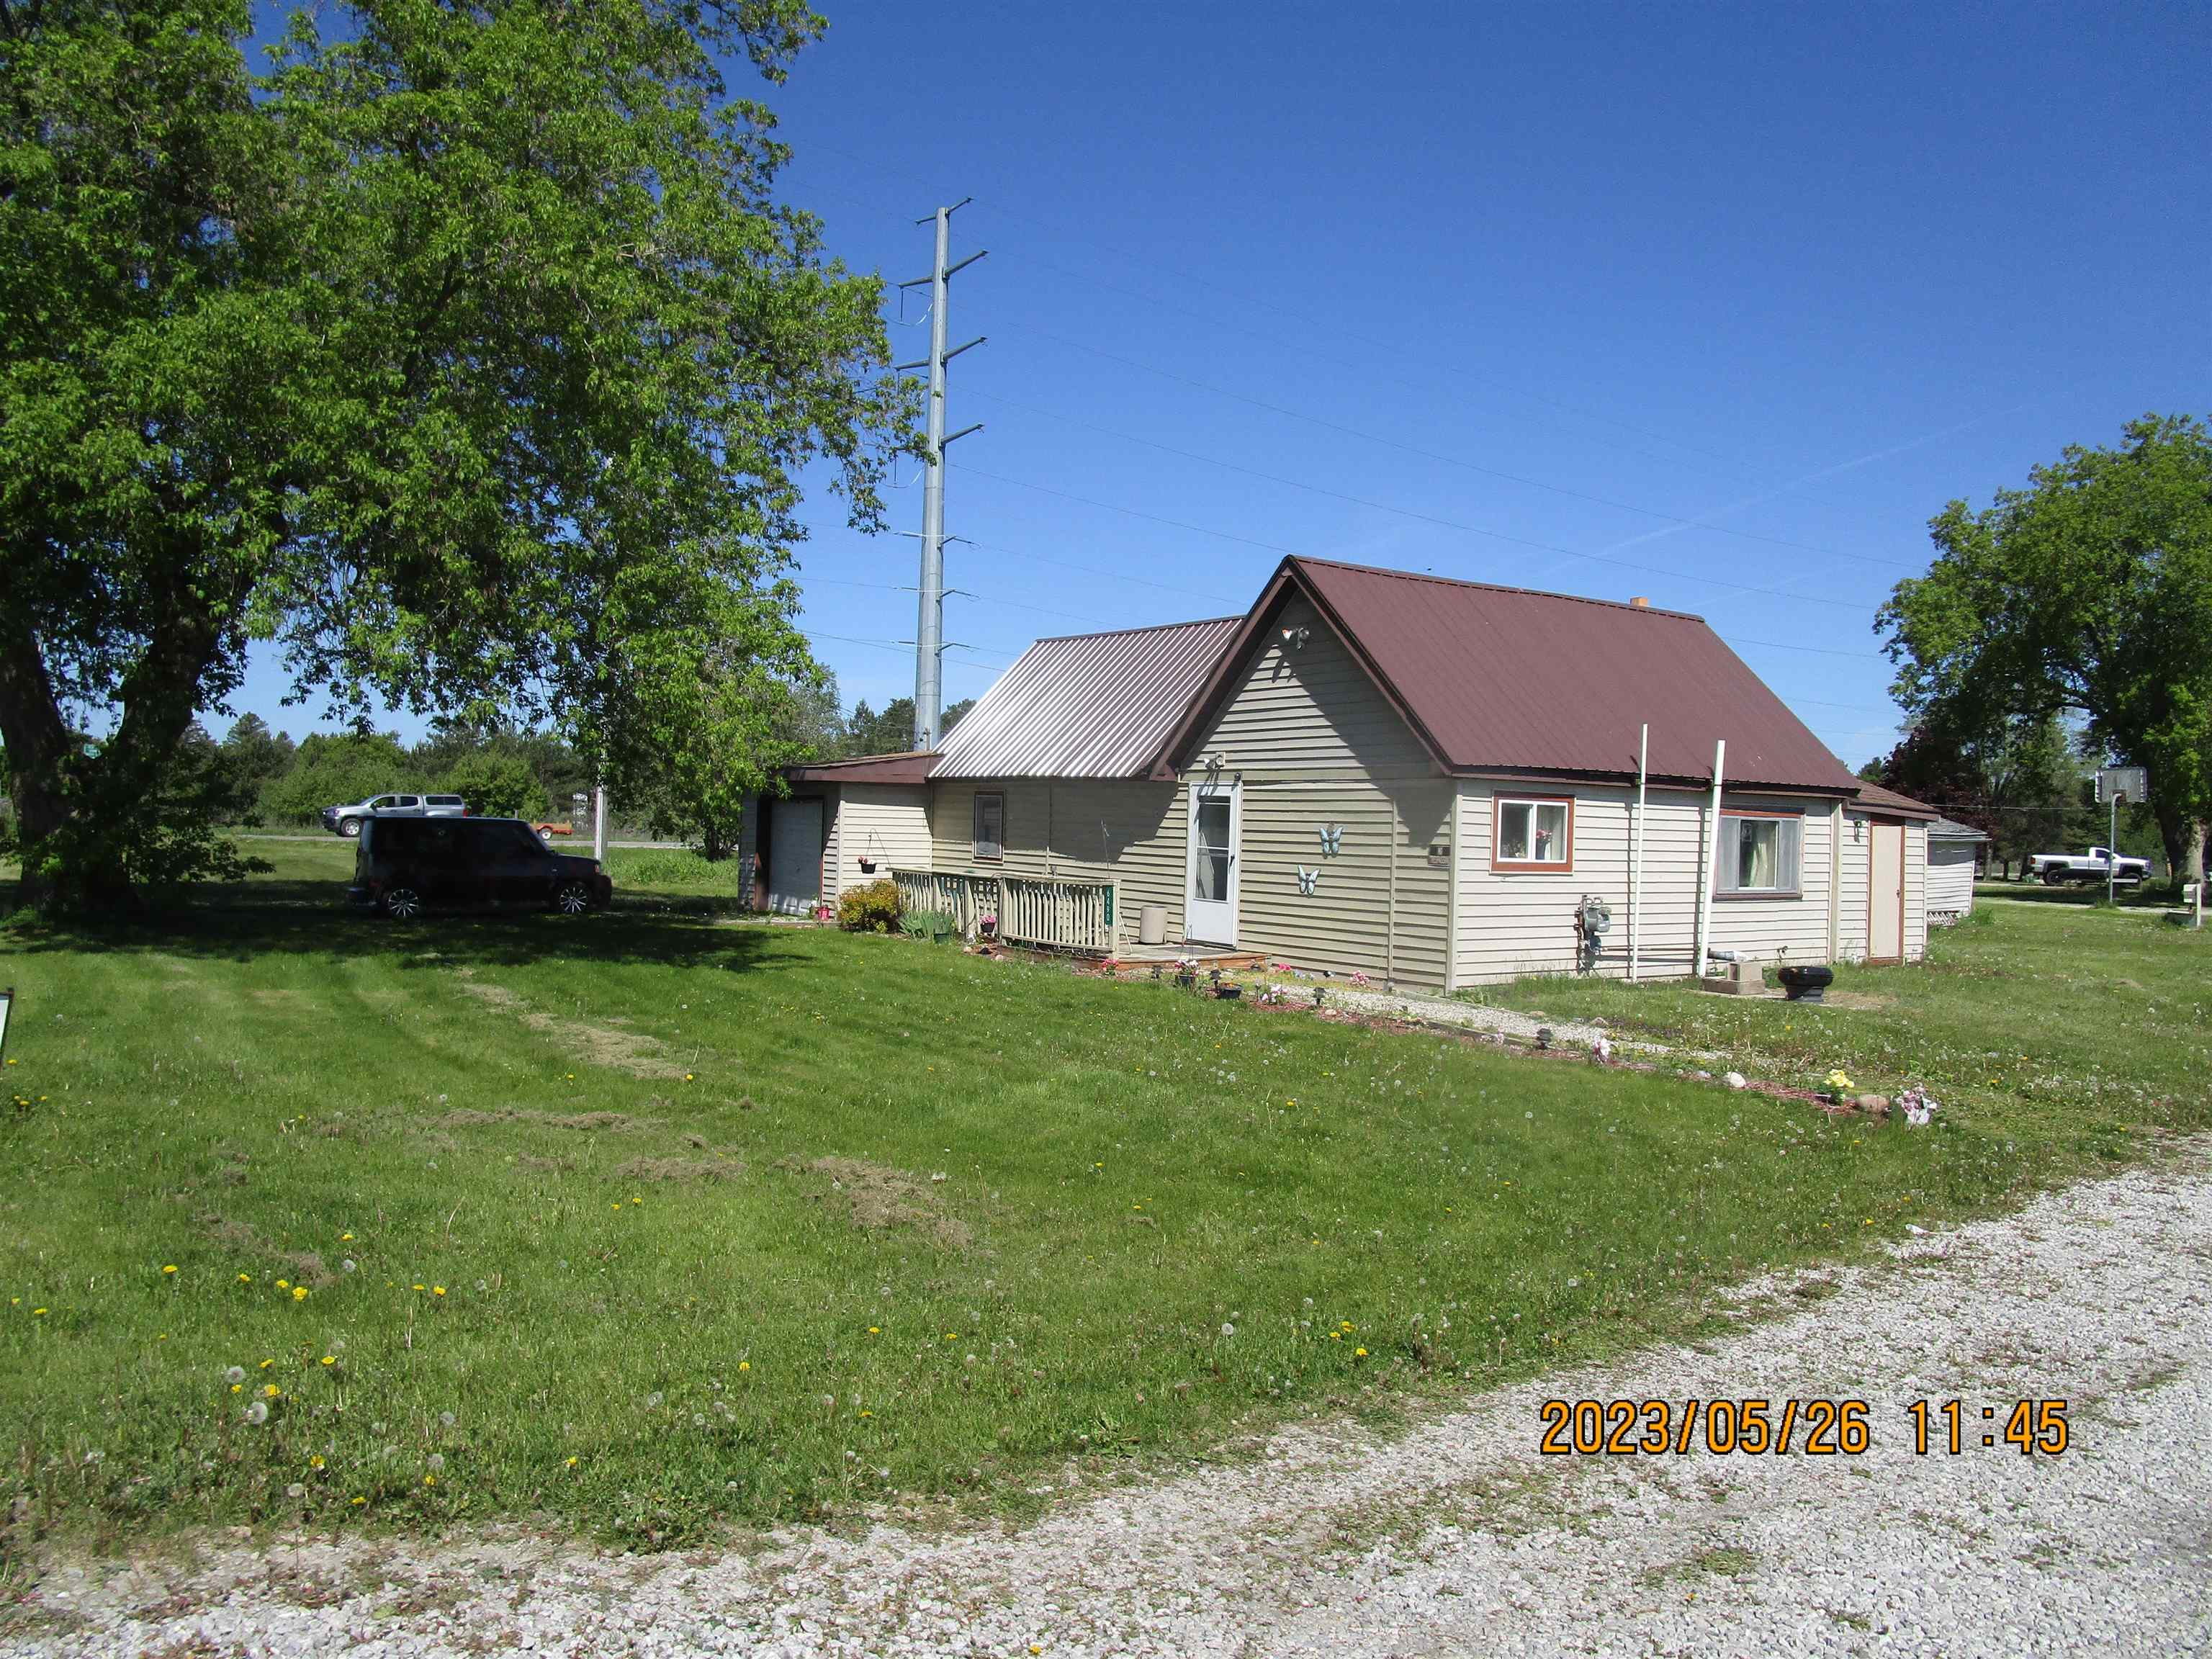 This 3 bedroom, 1 bath home with open living area, den/office, 9 x 15 laundry room with a 7 x 15 backroom/storage room, 1 car garage, an 14x14 out building all on 1 acre of land just outside of town for all the conveniences but with more room. Home has alot to offer but does need some TLC. Price to sell, view today before to late.